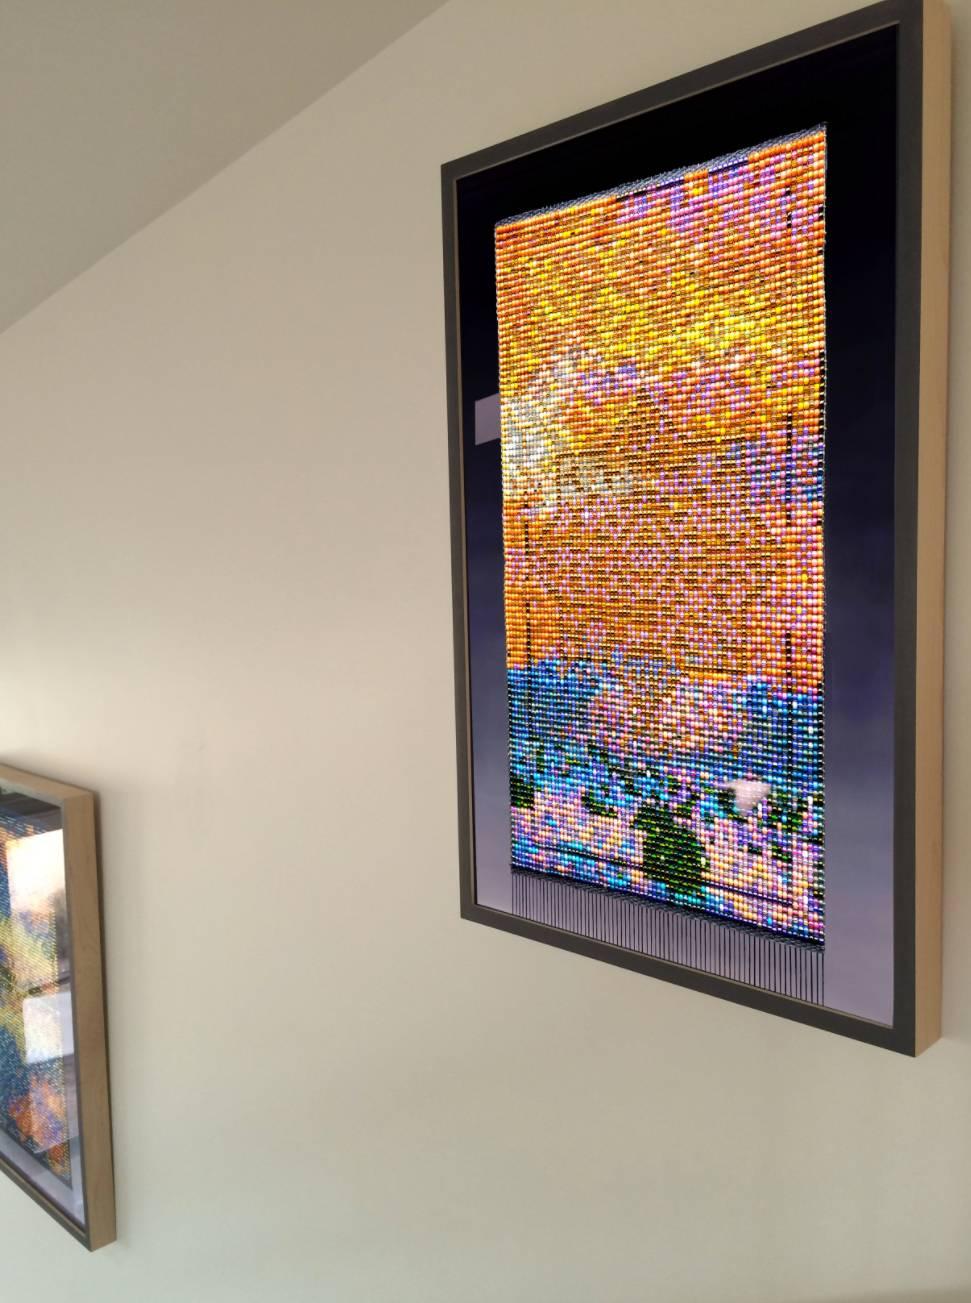 Sari Davis weaves thousands of minute beads into one fabric, no larger than a
human hand. Playing with scale and perception, Davis then re-imagines the
original weaving as a stained glass window: lit from within and glowing with
color. In each